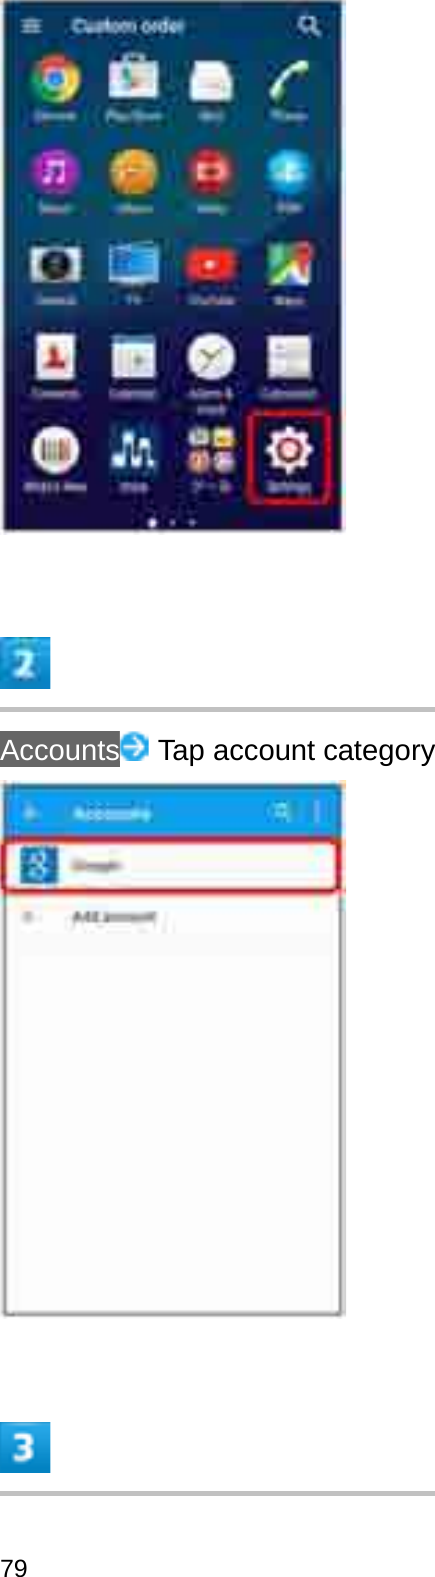 Accounts Tap account category79